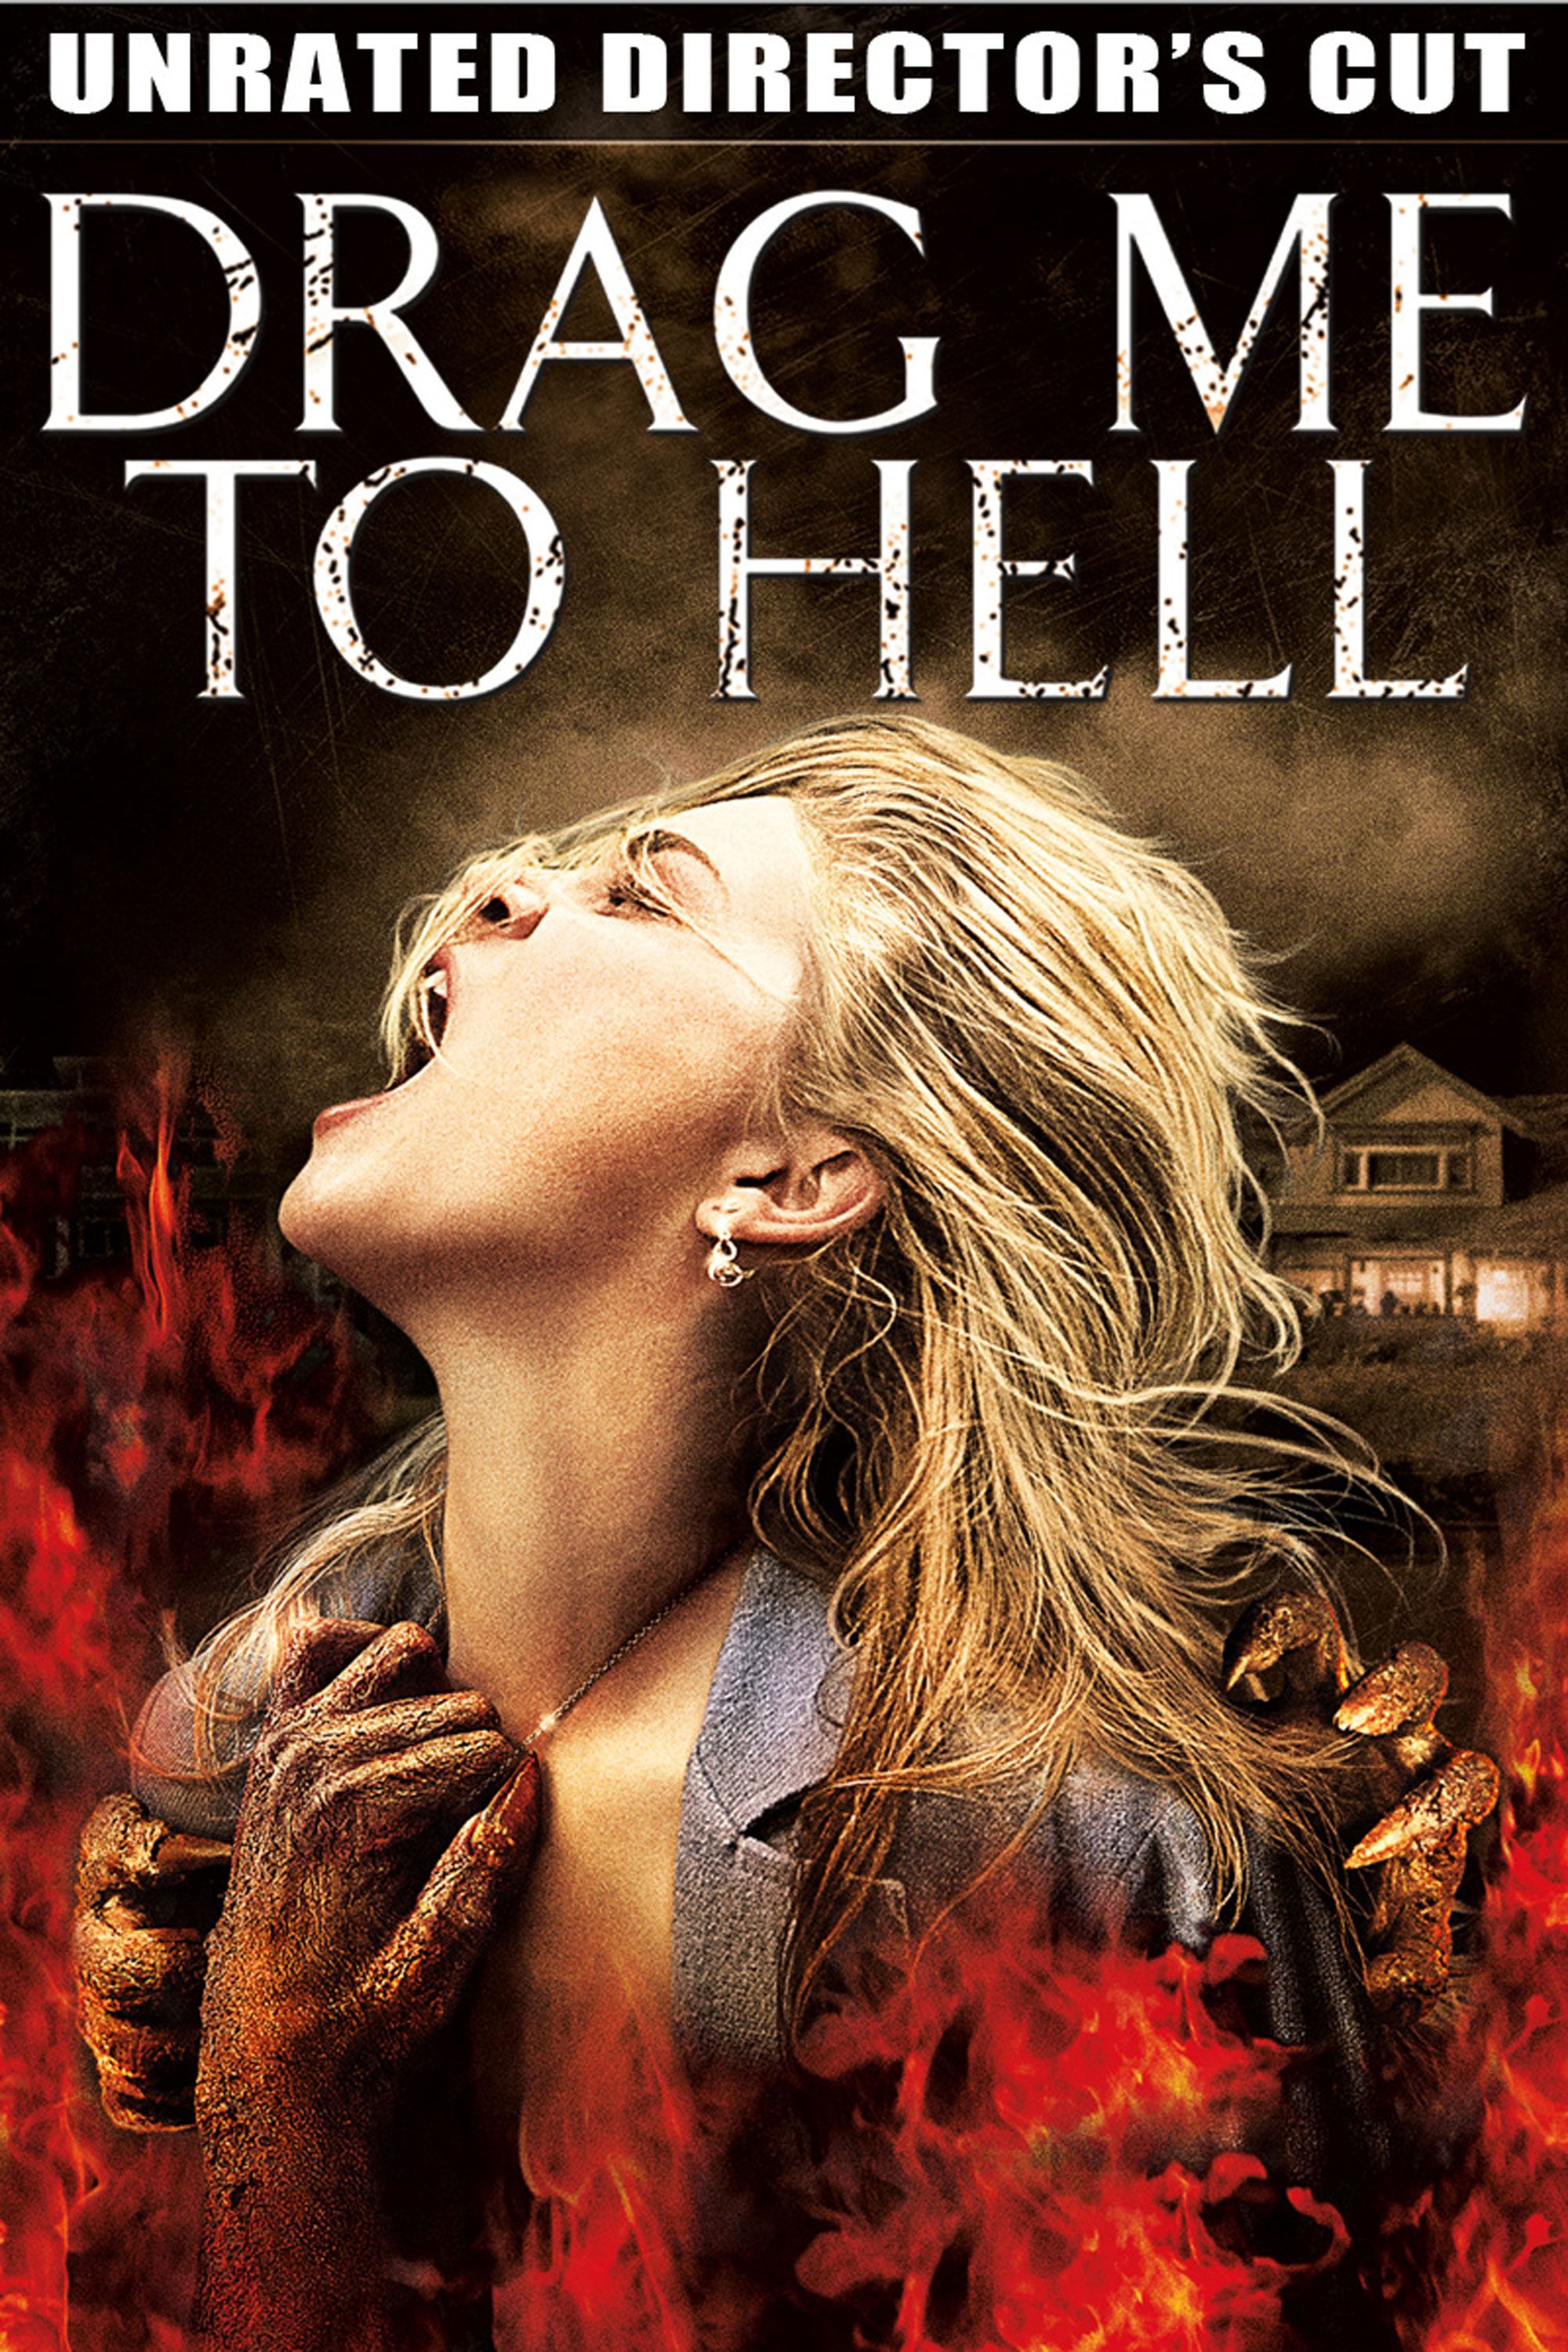 drag me to hell movie poster